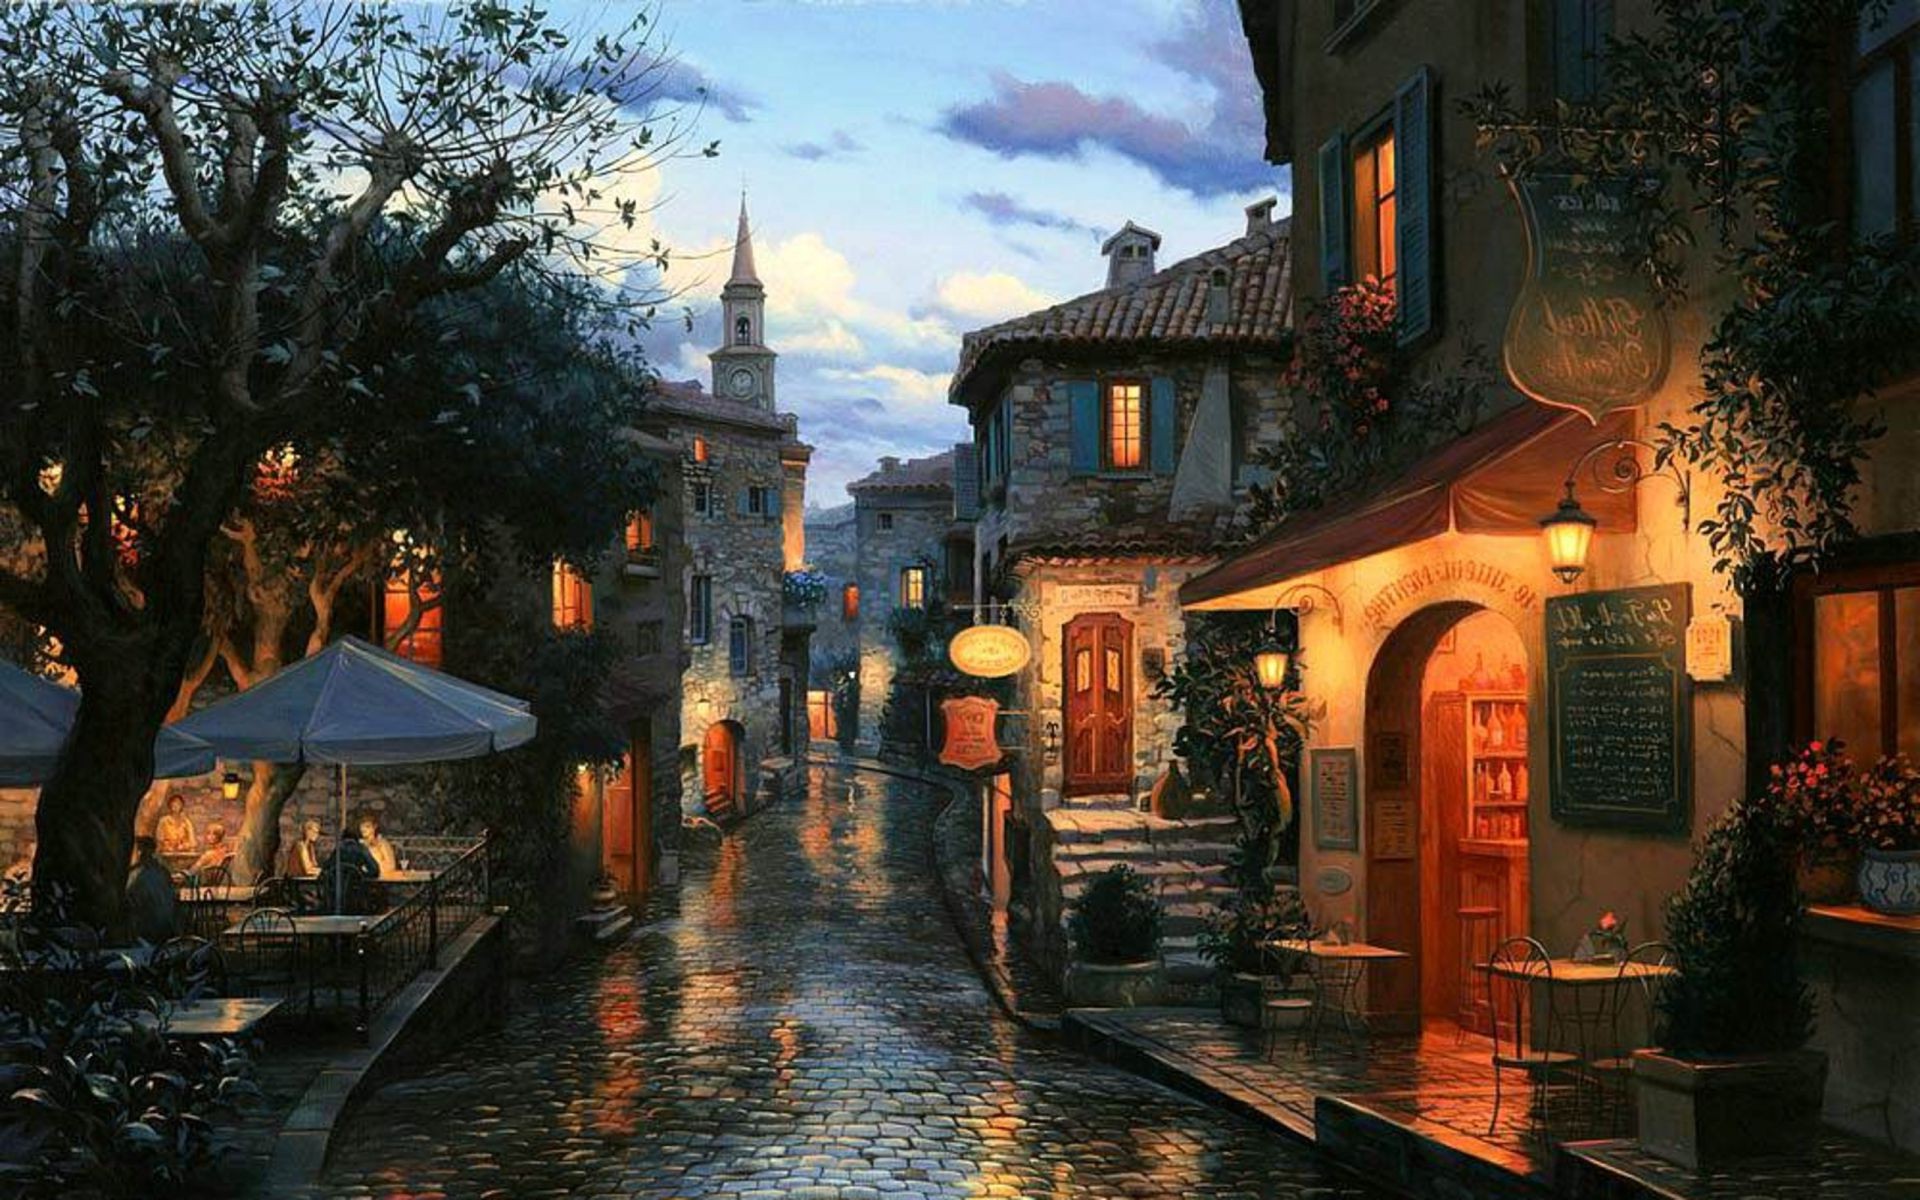 city travel architecture street building tourism town house old evening outdoors art traditional tourist